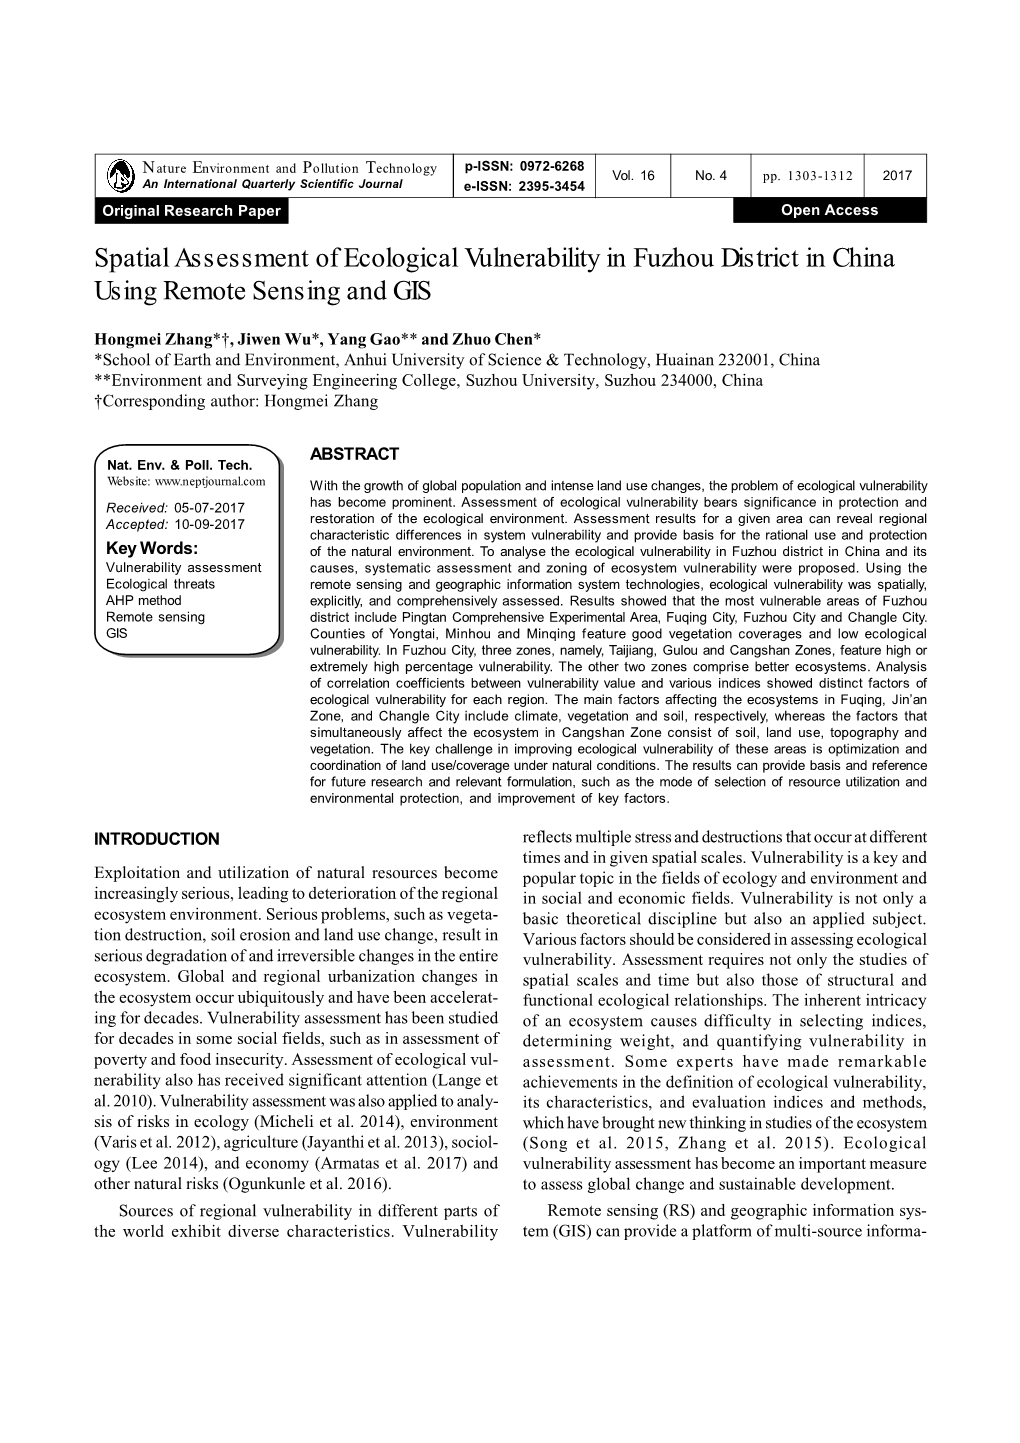 Spatial Assessment of Ecological Vulnerability in Fuzhou District in China Using Remote Sensing and GIS